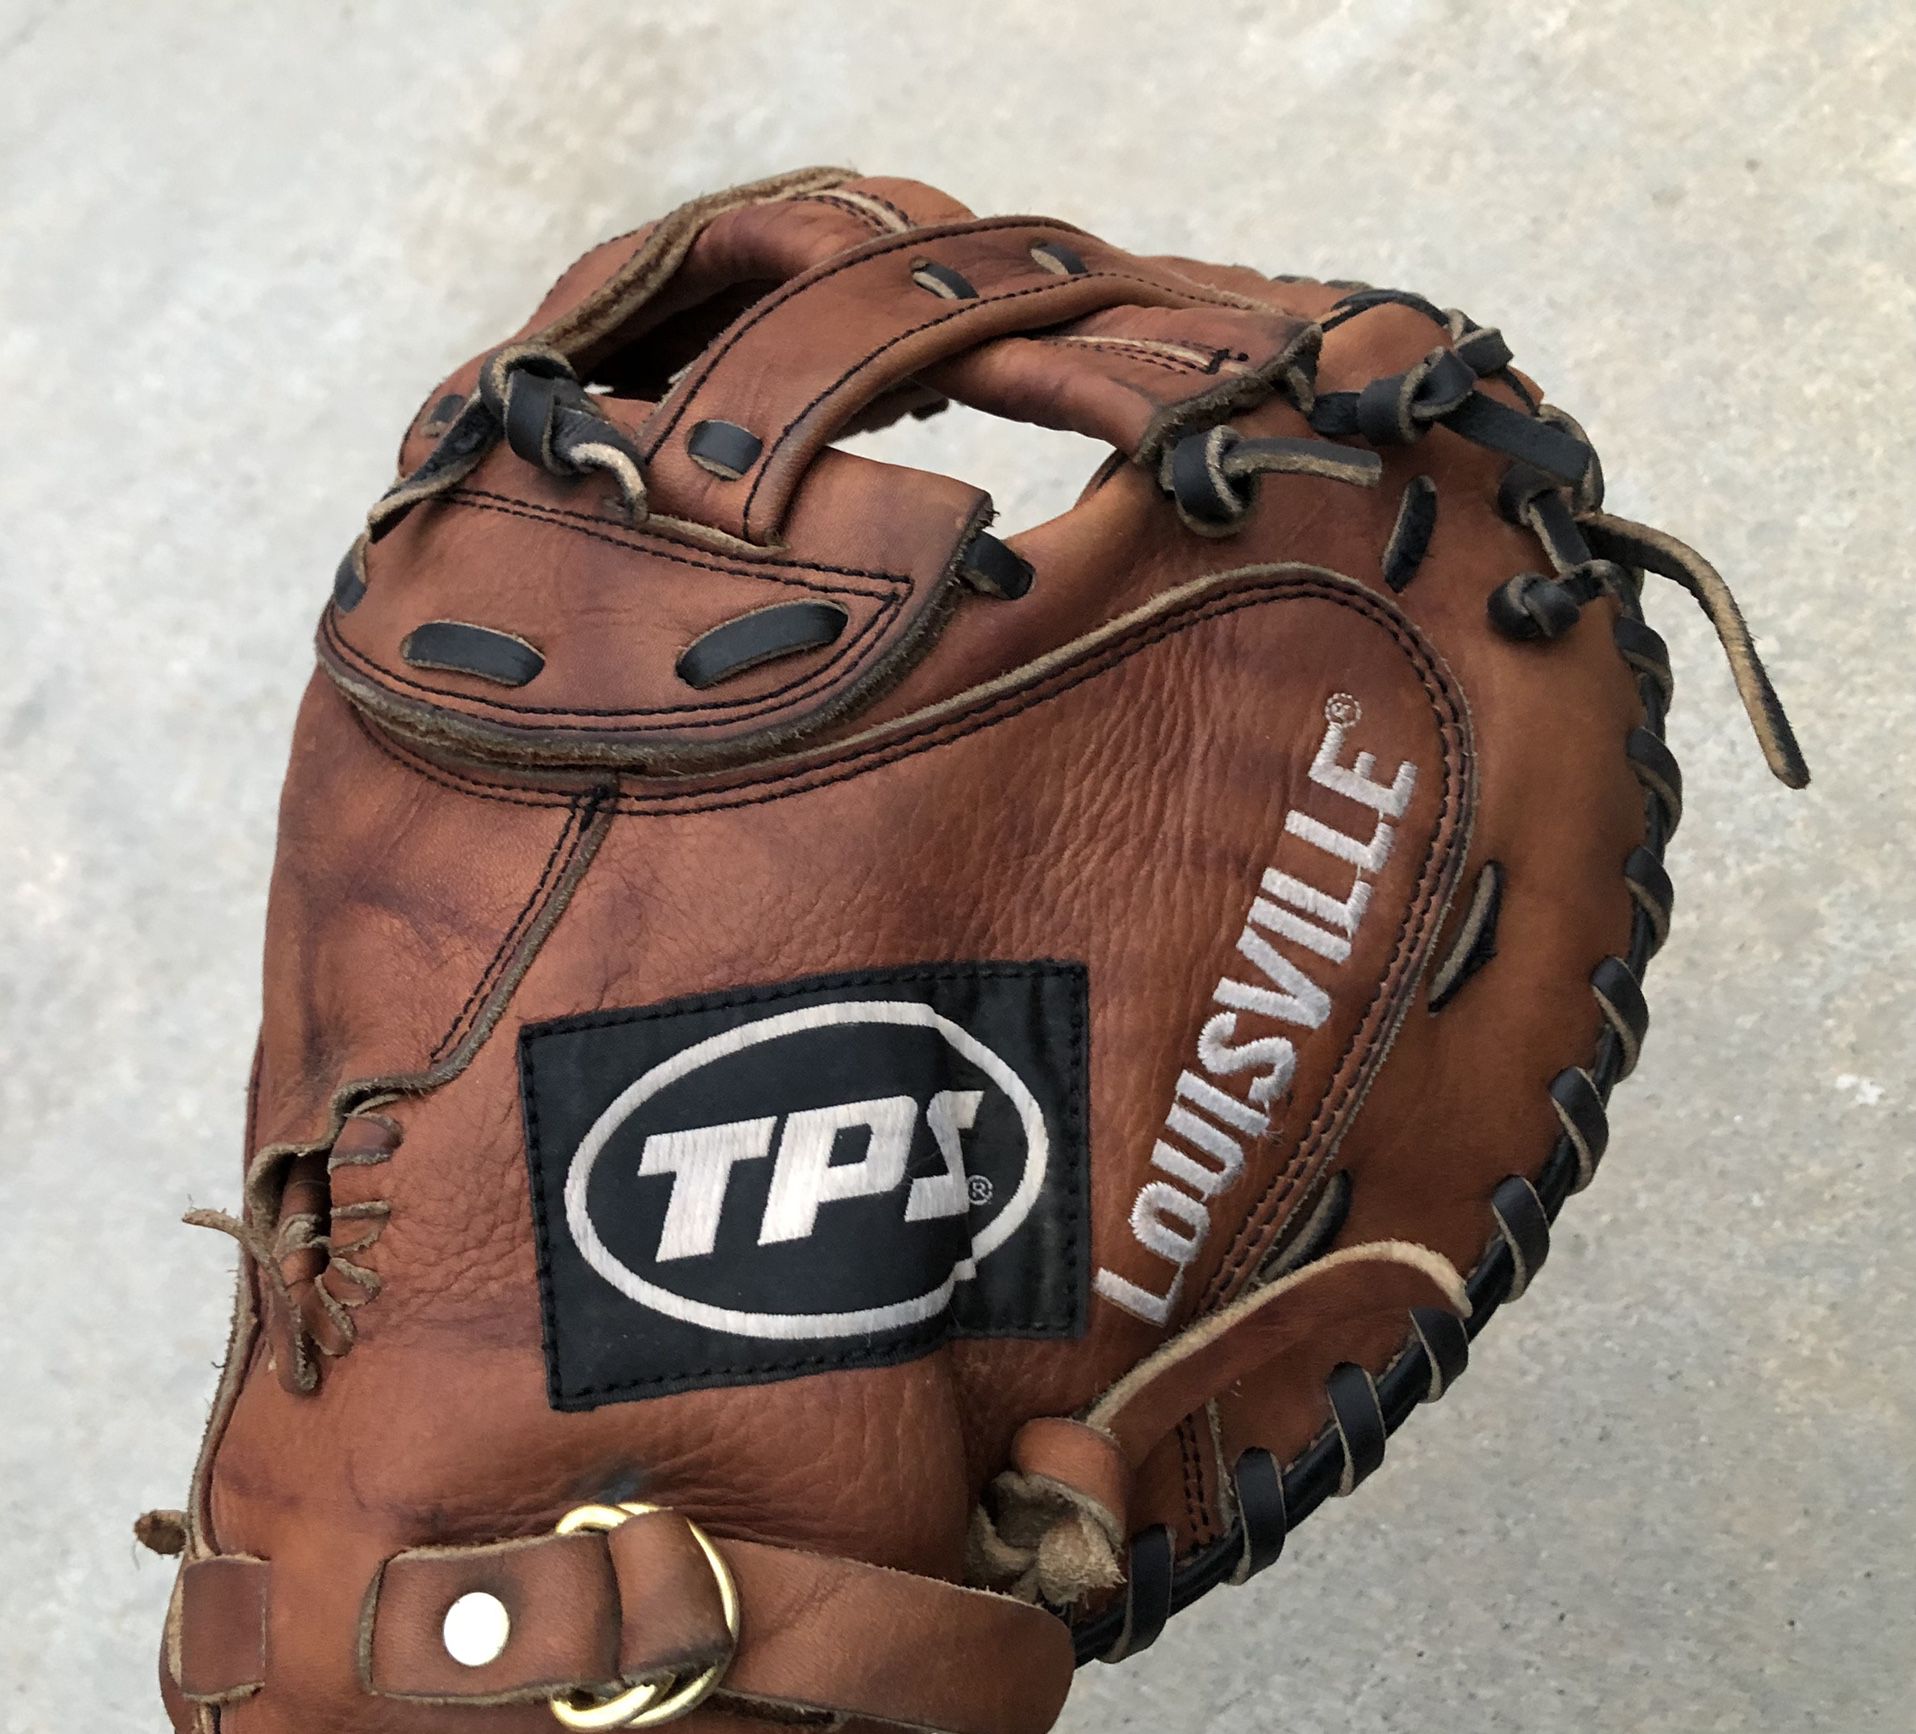 Louisville TPS Softball Catcher Glove In Excellent Condition Have More Equipment 